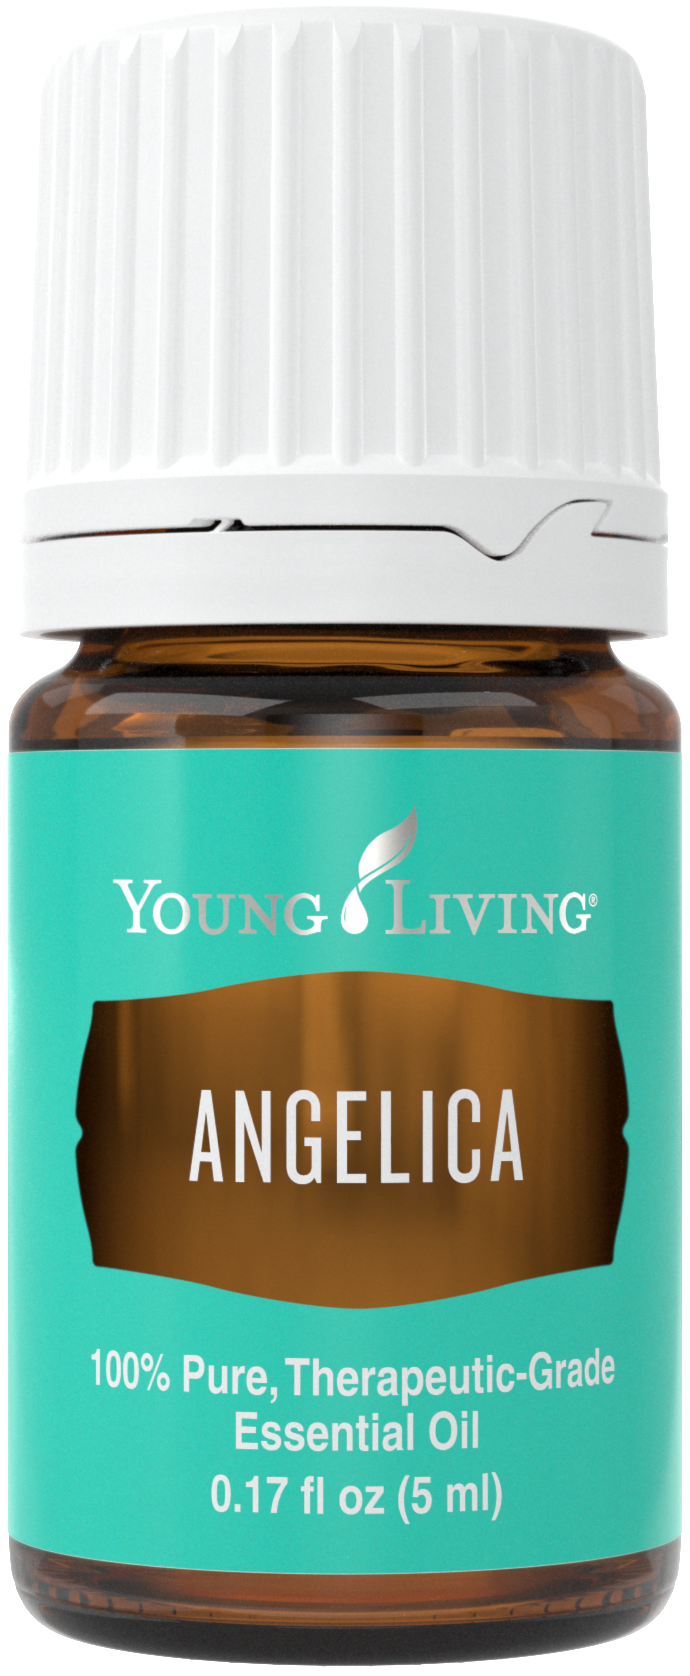 Angelica 5ml Silo.png